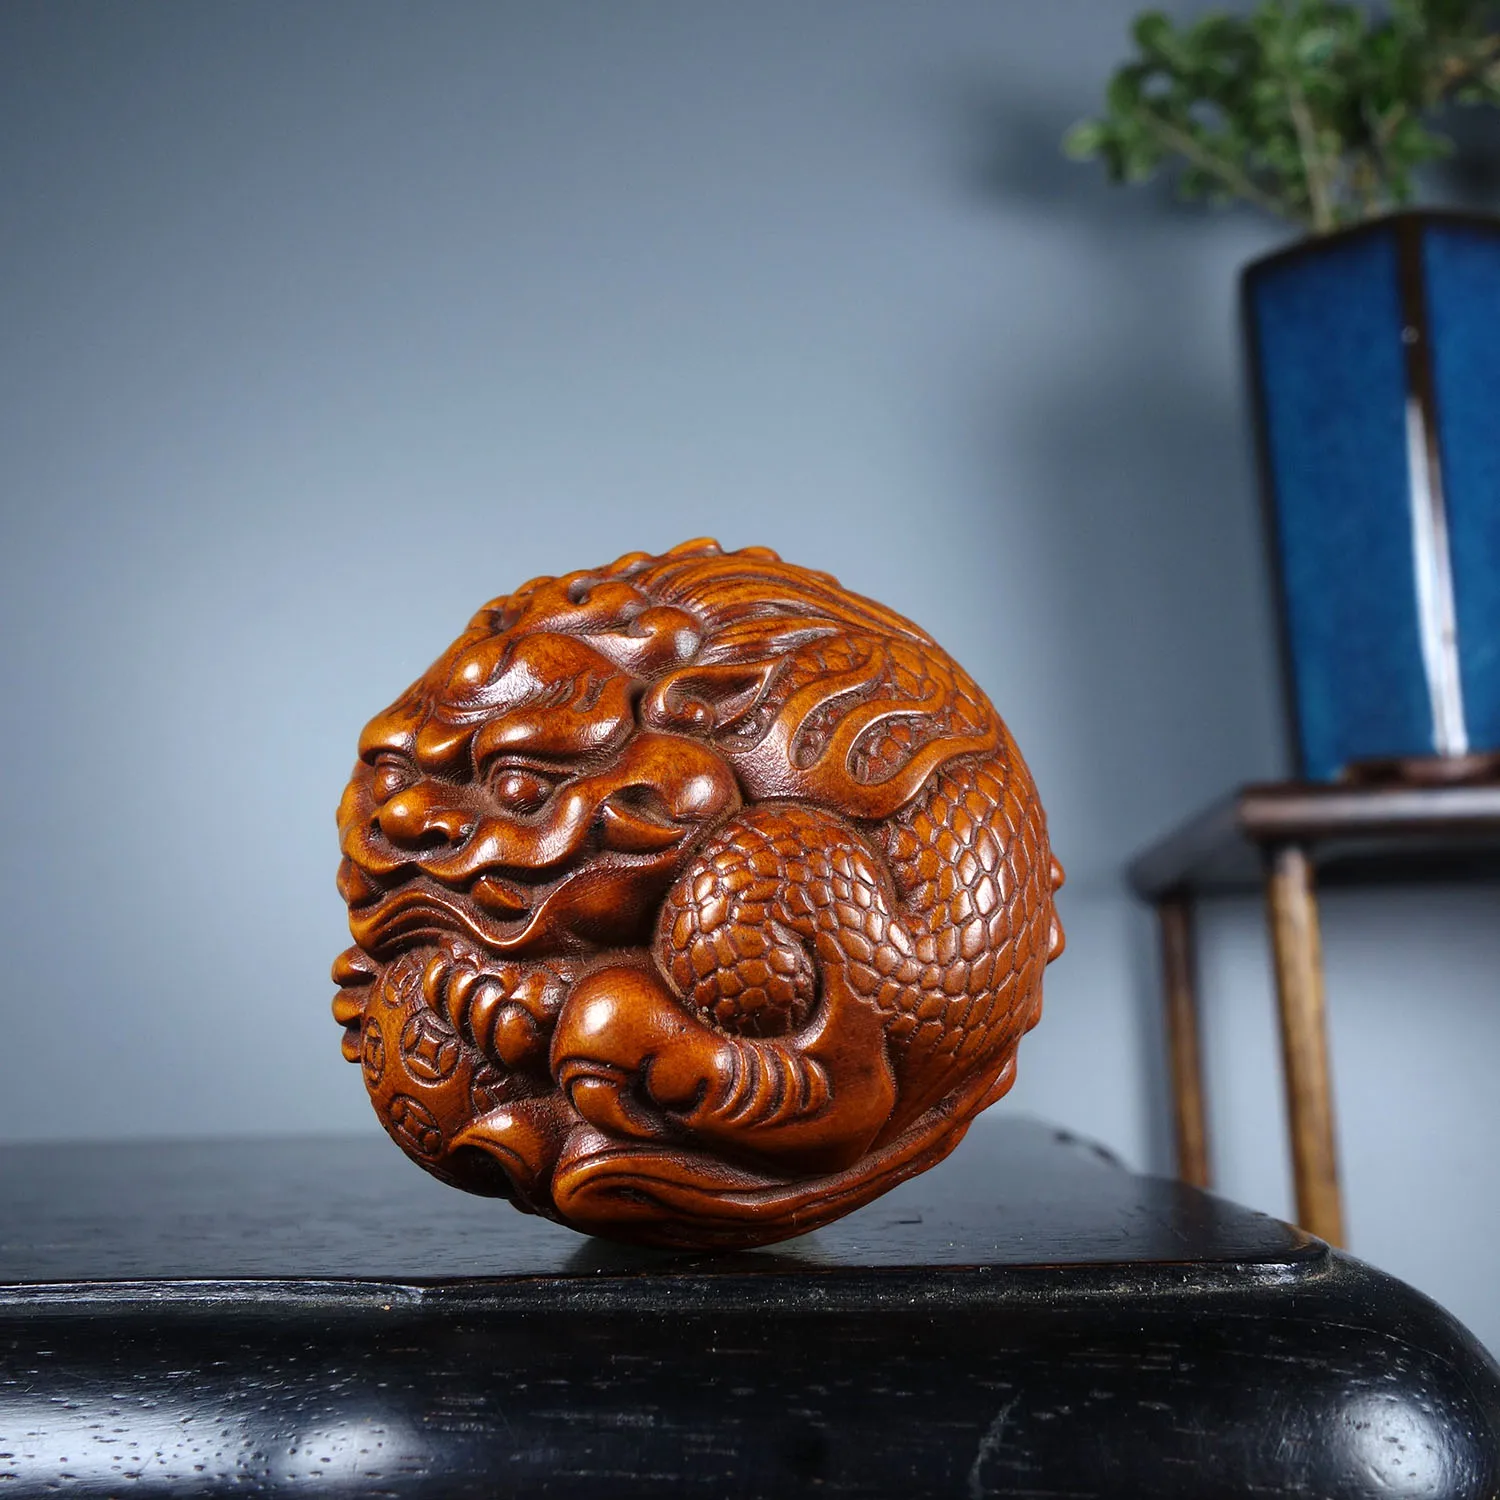 

Huangyang Wood Carved Plastic Ornaments are Finely Crafted and Have a Beautiful Appearance Which is Worth Decorating